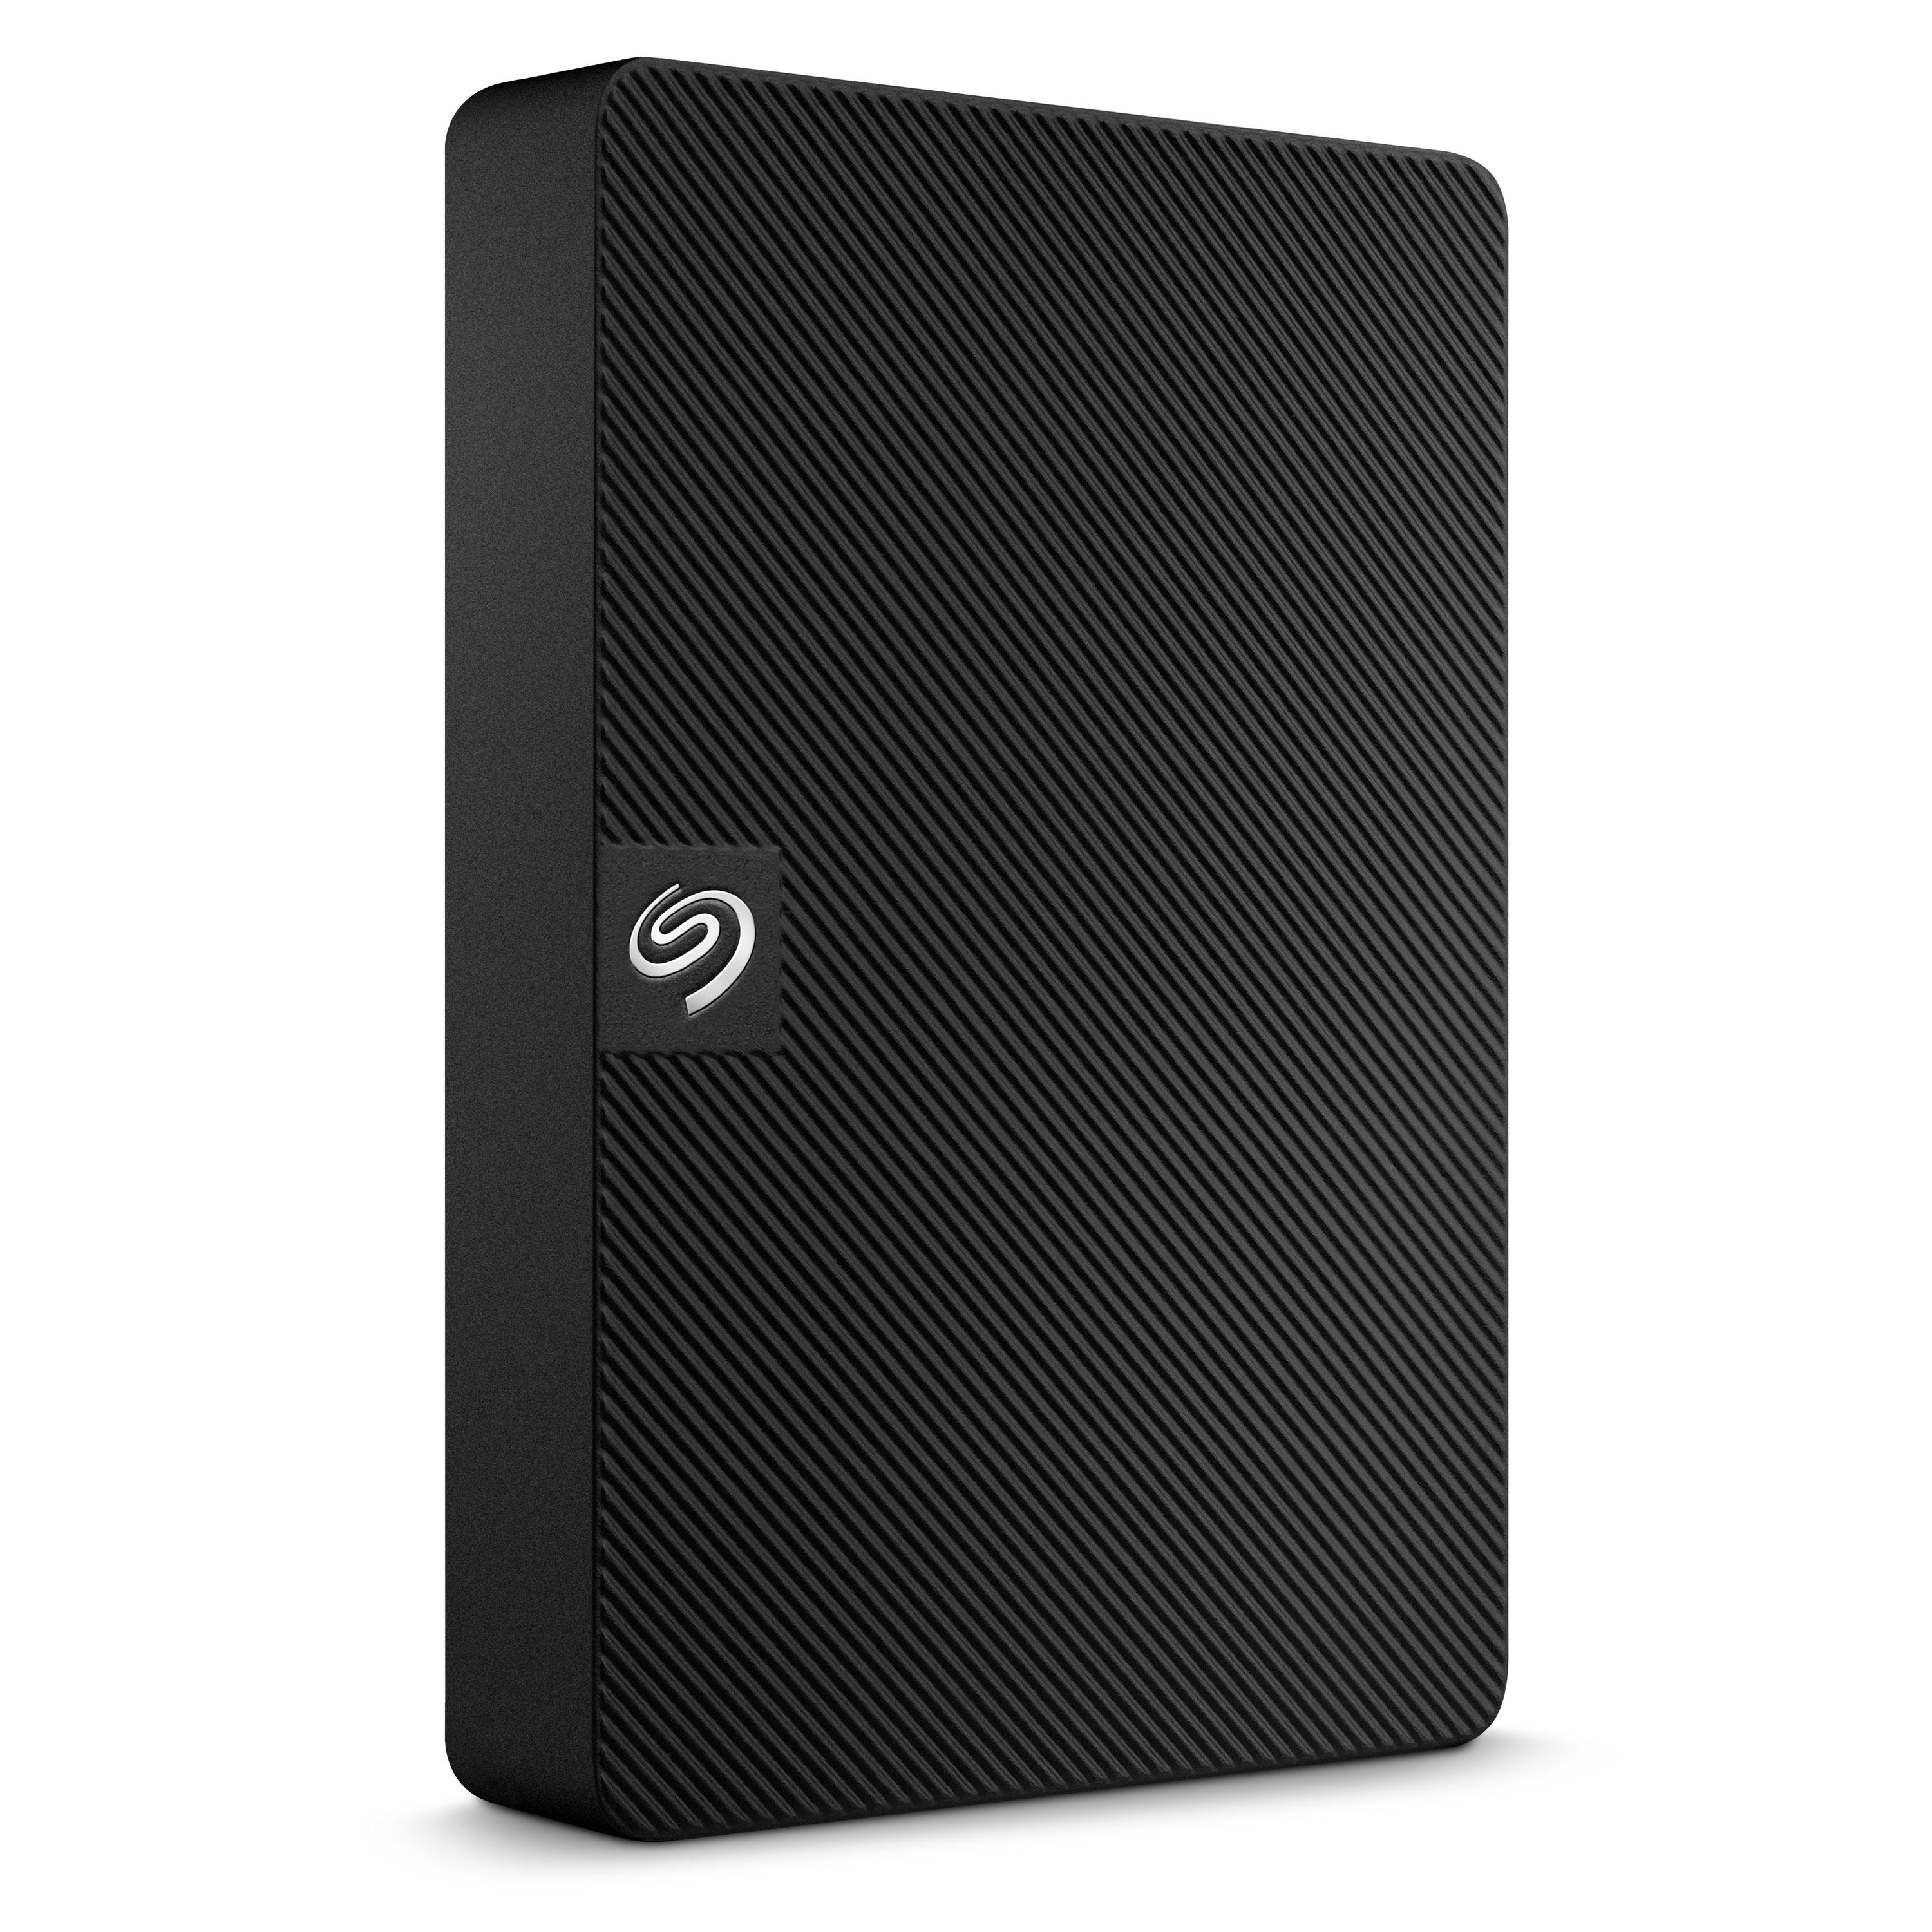 Seagate Expansion Portable, 4TB, External Hard Drive, 2.5 Inch, USB 3.0, for Mac and PC, 2 year Rescue Services (STKM4000400)